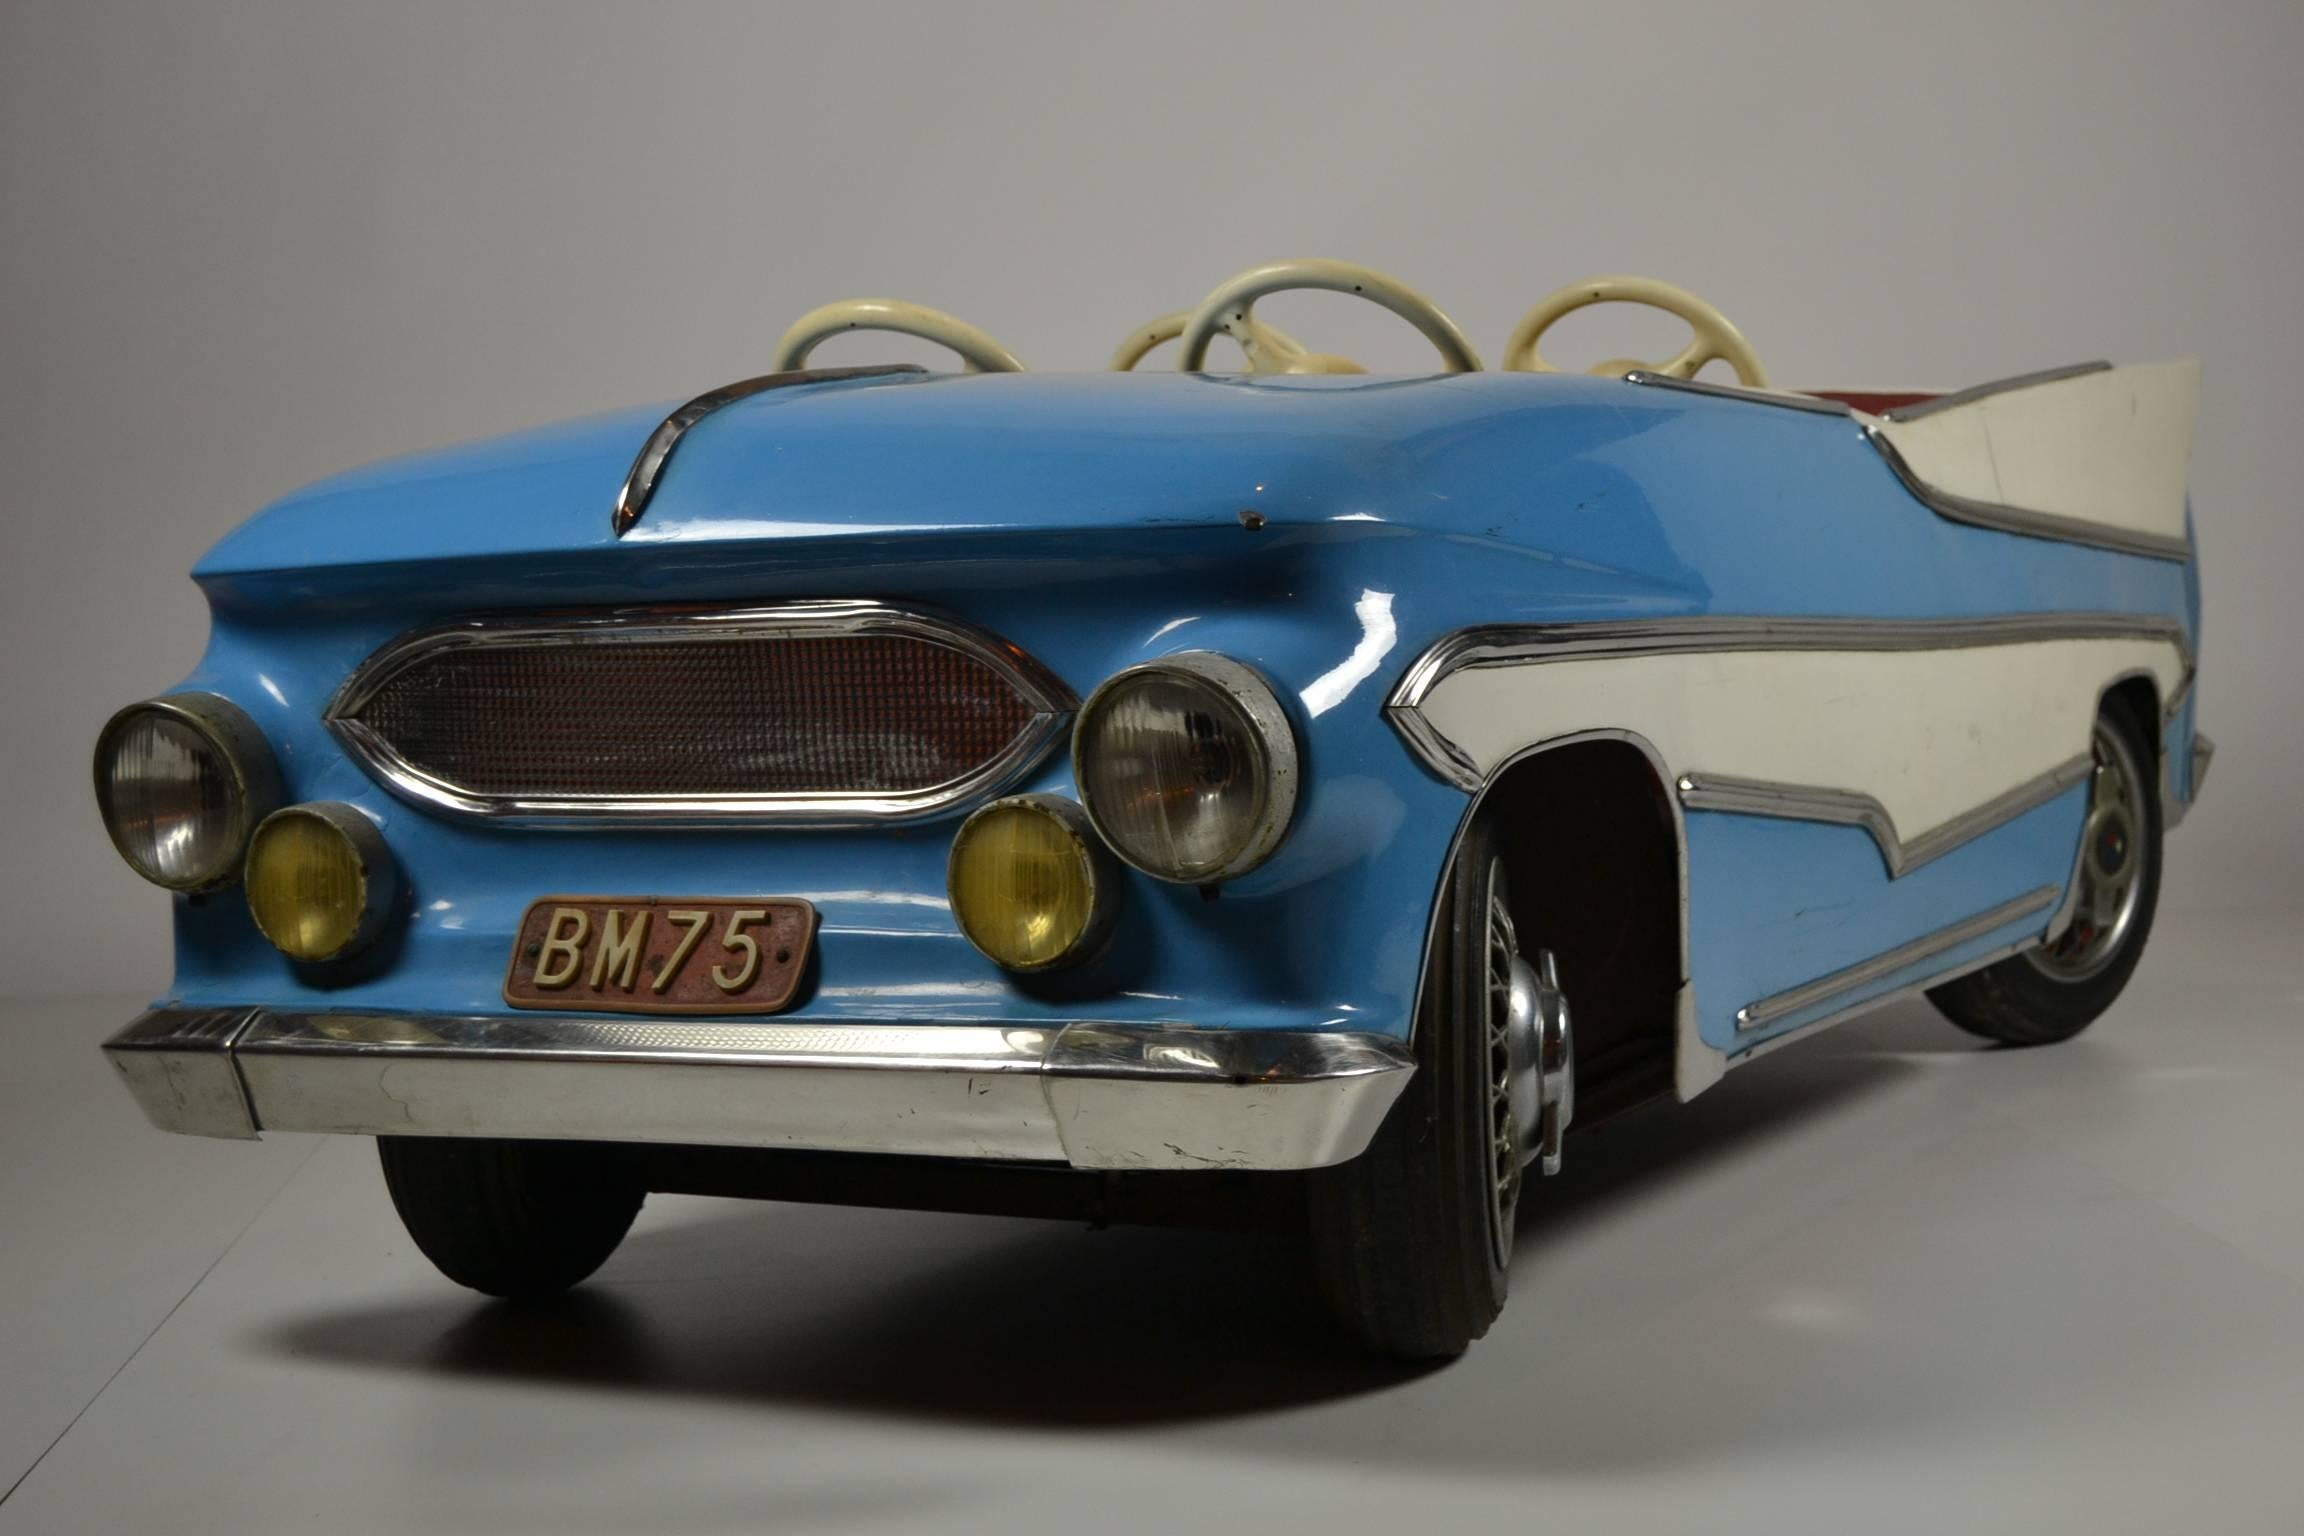 Cool carousel American, 1950s car.
Attributed to the American chevrolet impala, chevy Bel air or vintage buick.
Extra large scale model of a two tones convertible four-seat oldtimer.
Polyester/fiberglass body on metal frame with full rubber tyres